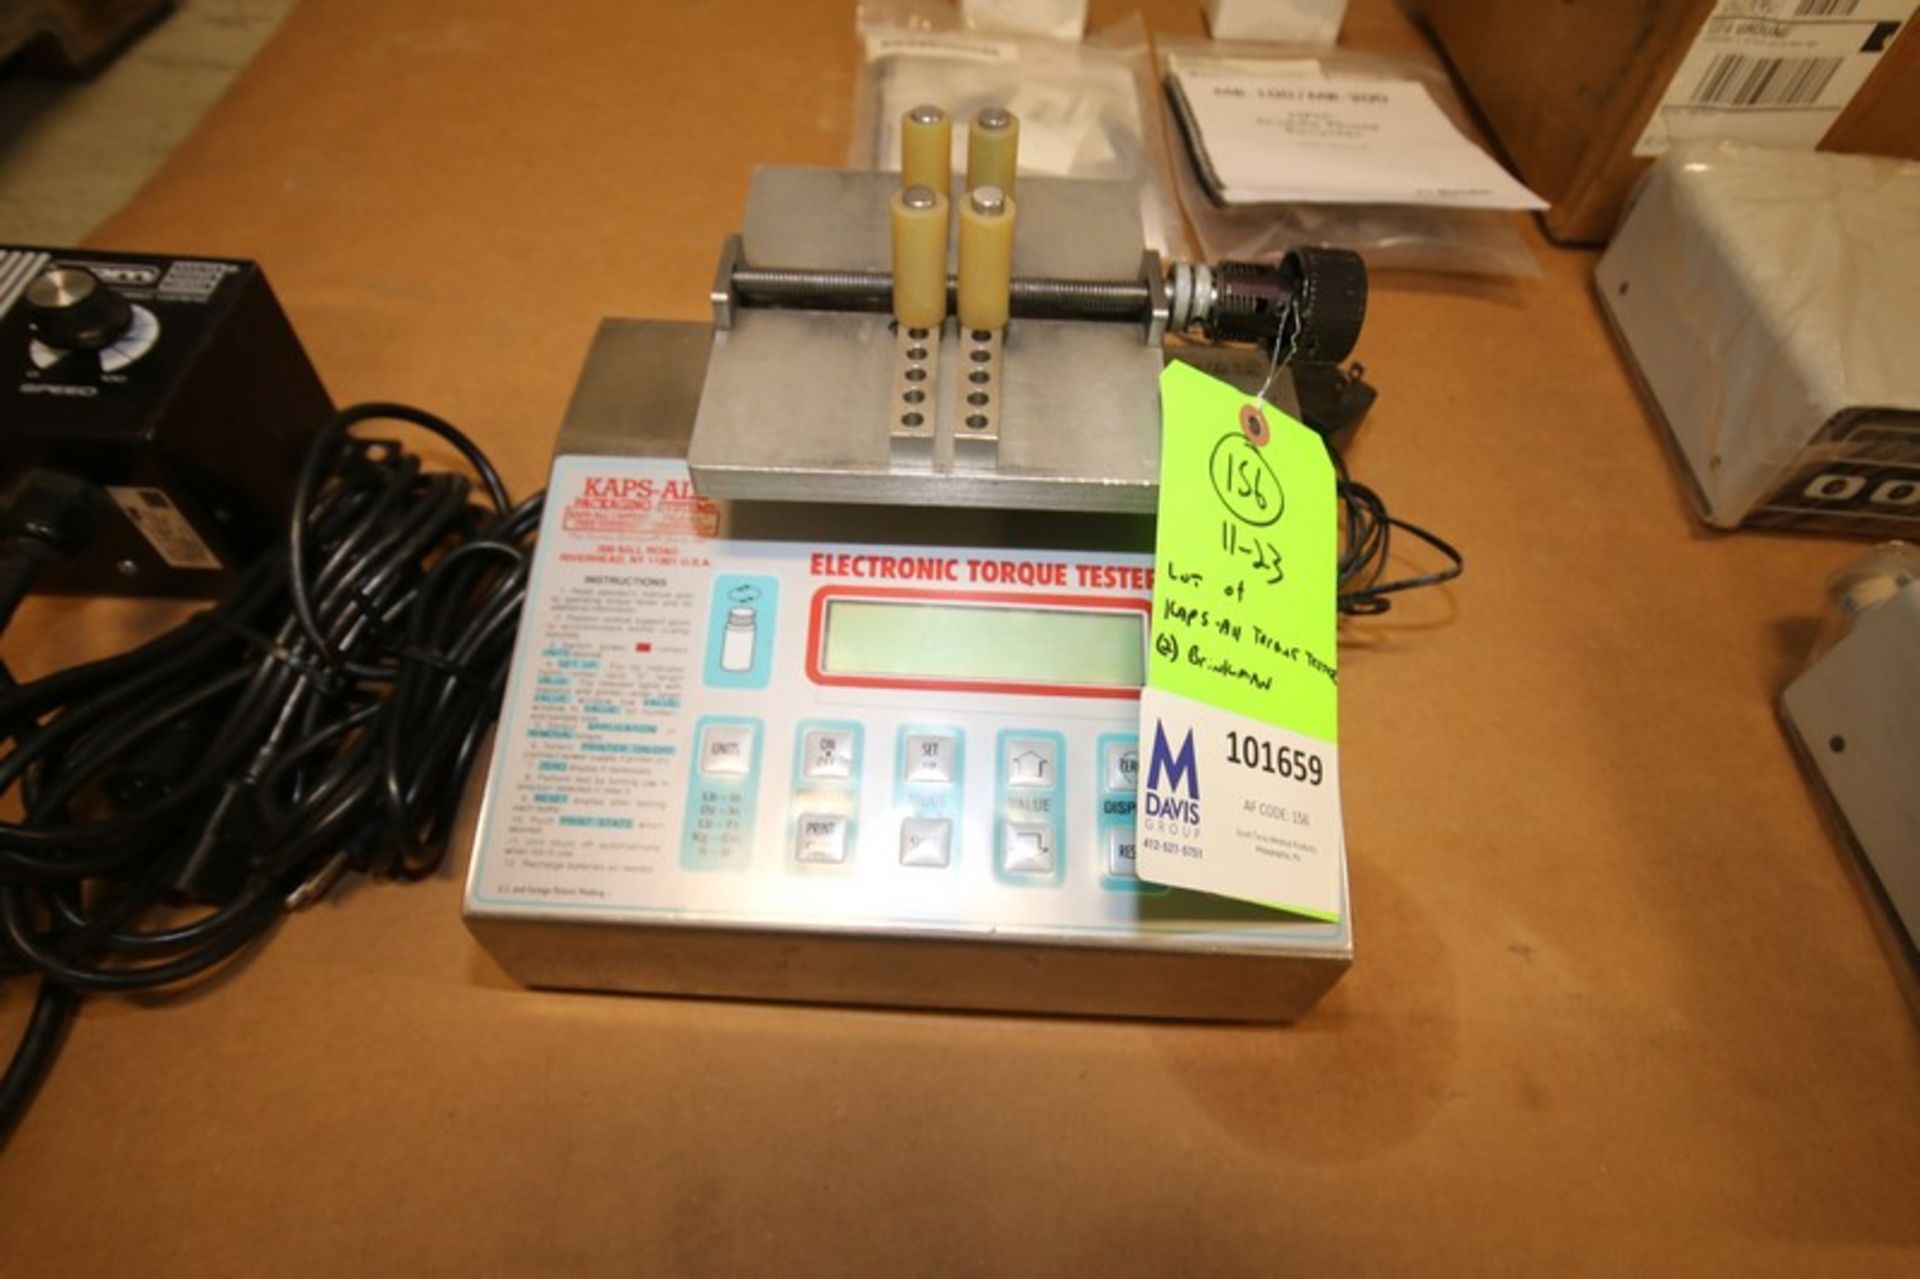 Lot of Assorted Items Including Kaps - All Electronic Torque Tester, WPM Motor Speed Controller & ( - Image 2 of 4